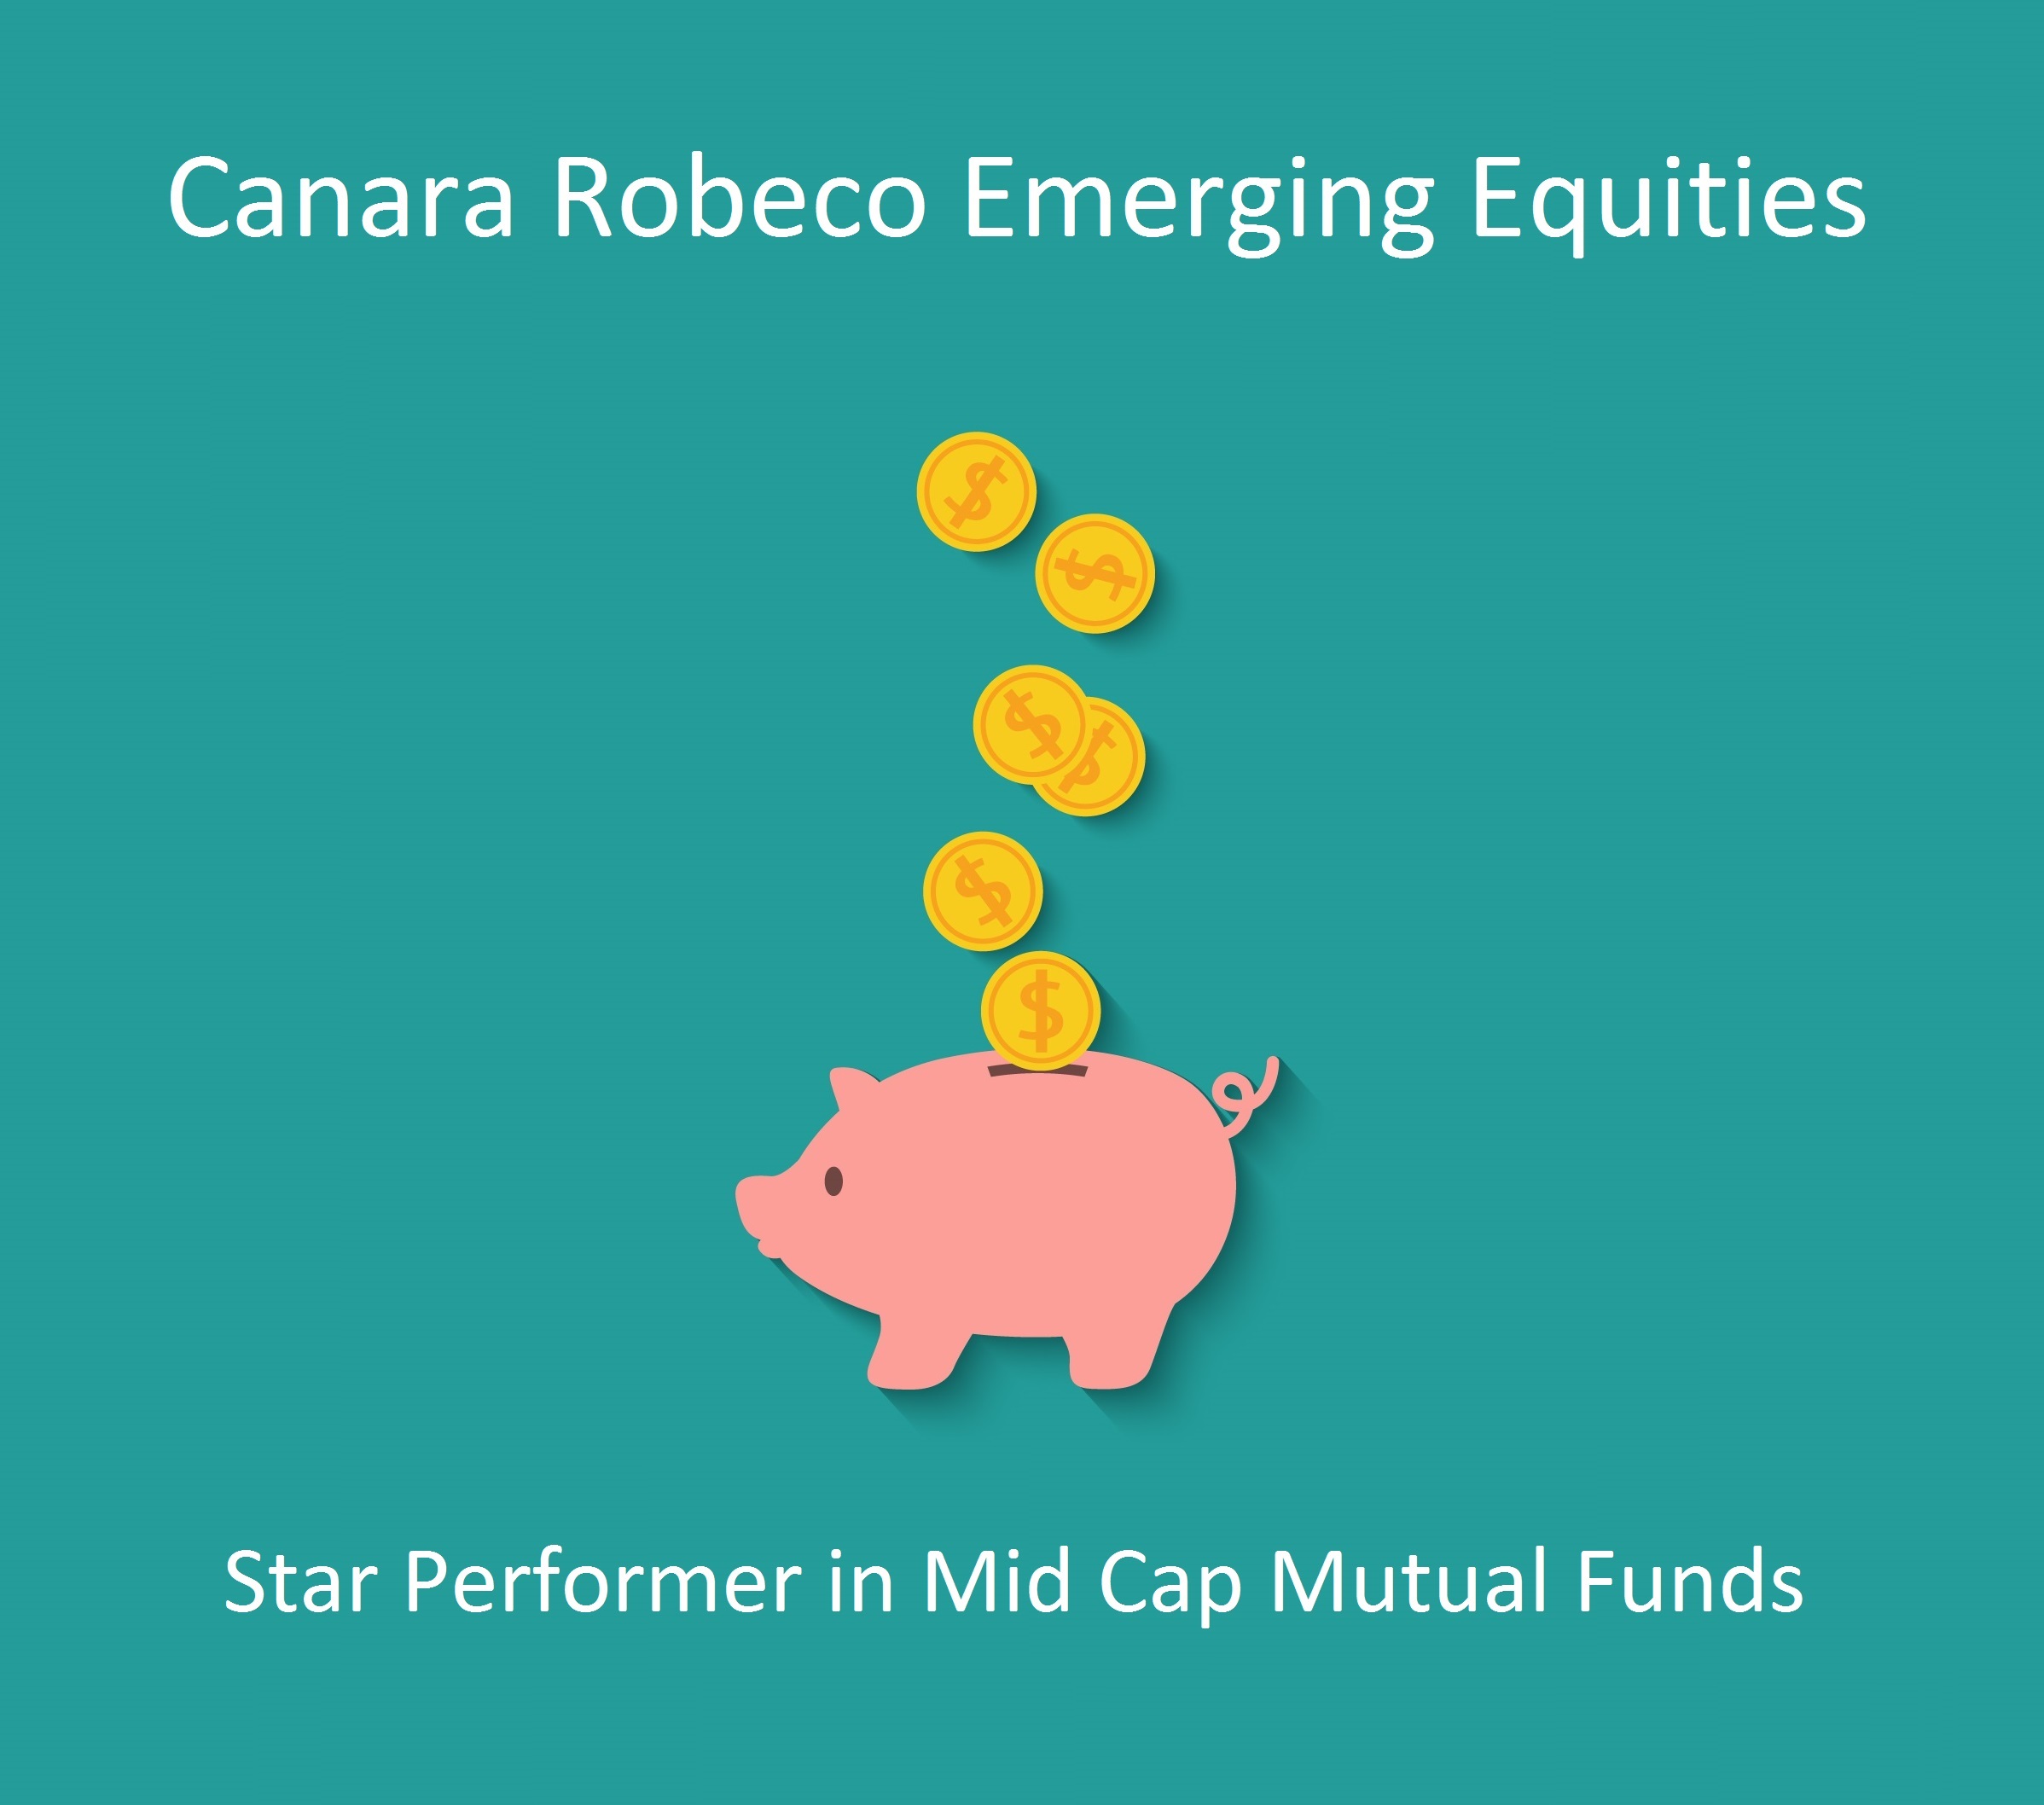 STAR OF THE SHOW – CANARA ROBECO EMERGING EQUITIES!